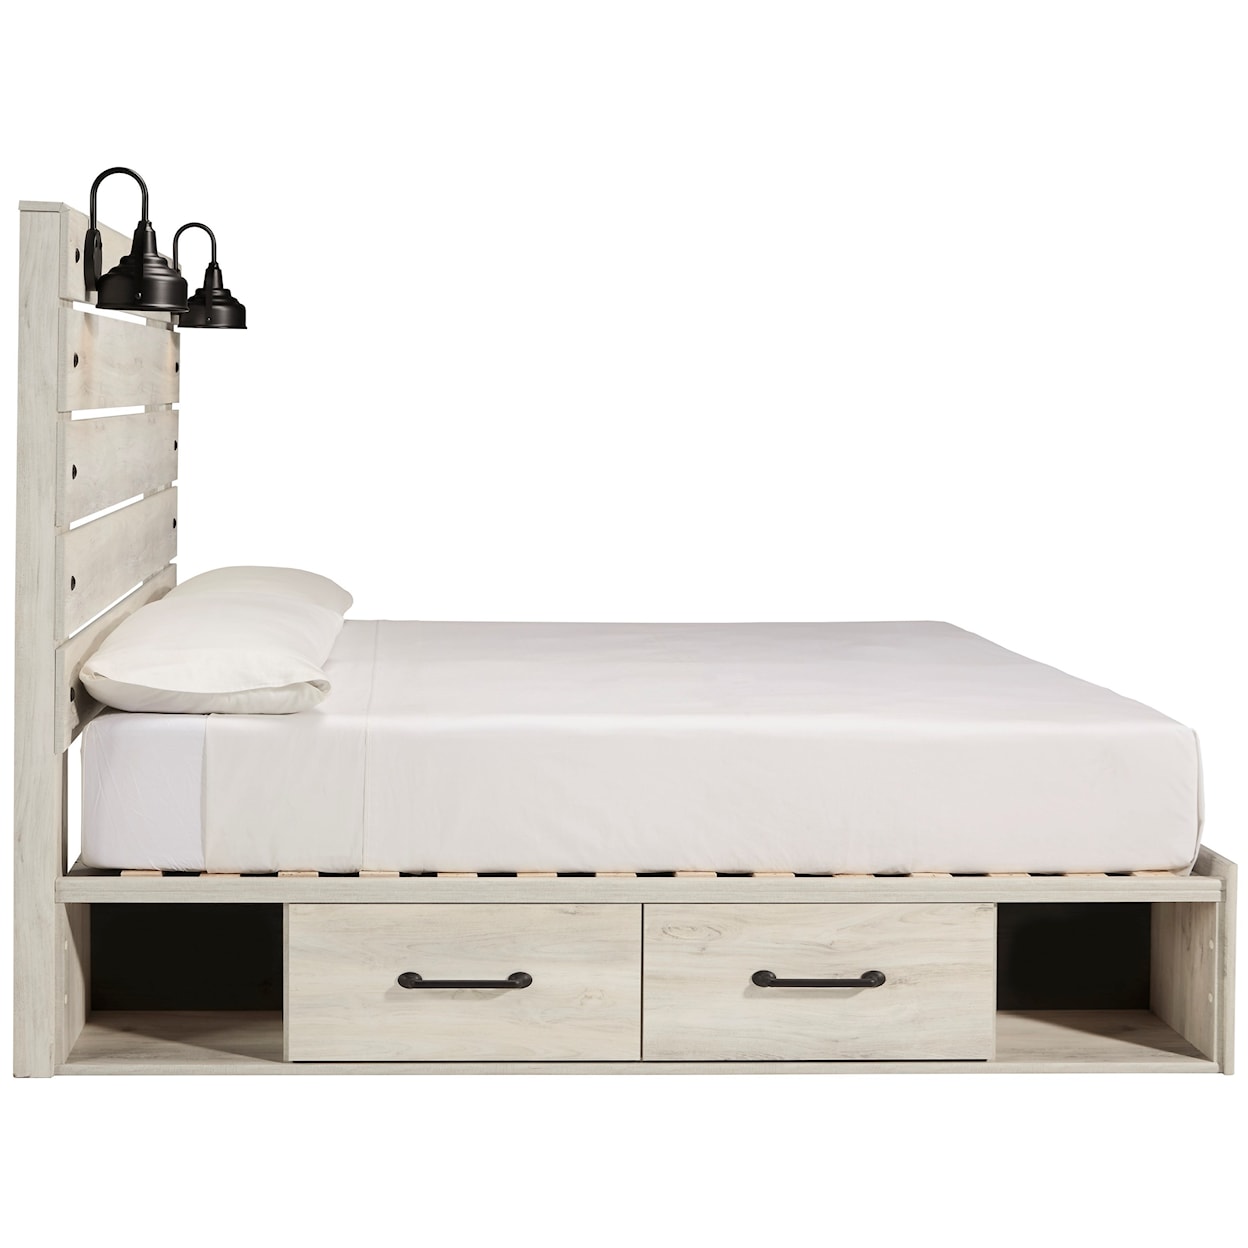 Ashley Furniture Signature Design Cambeck King Storage Bed with 4 Drawers